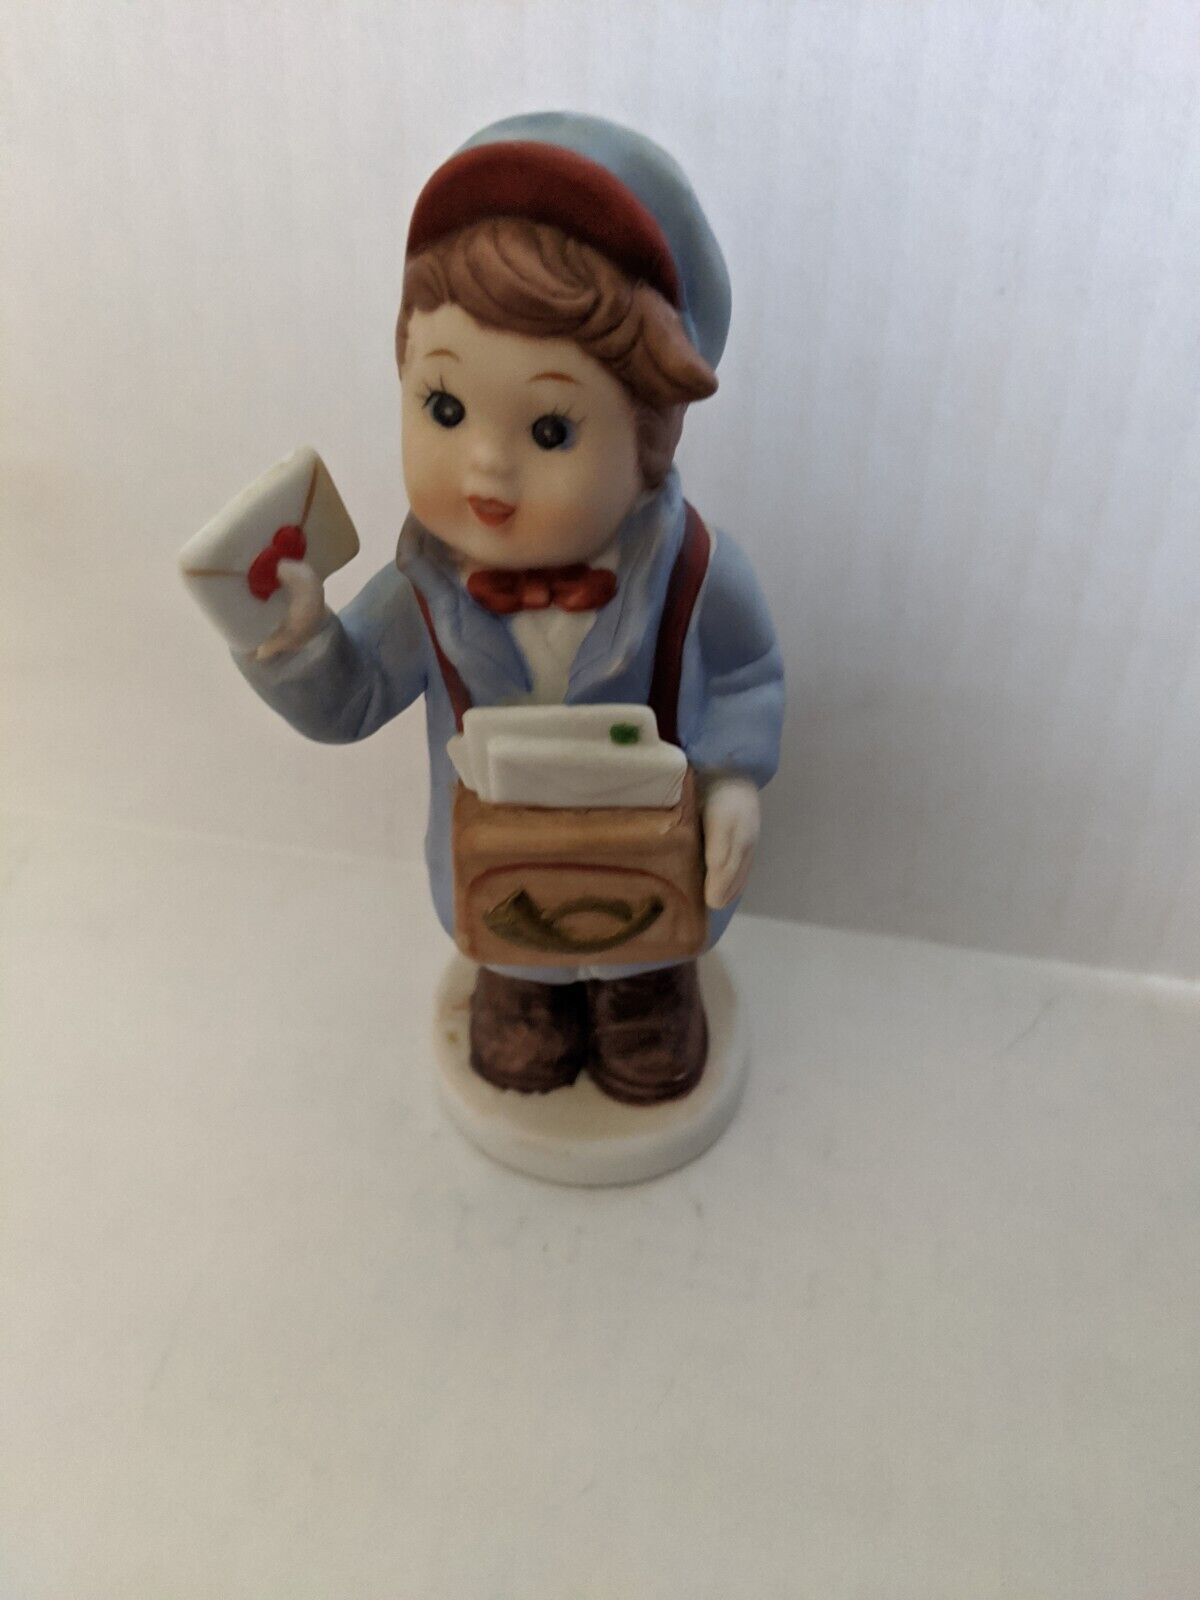 Hummel-like Figurines Boy With Mail. Pre-owned